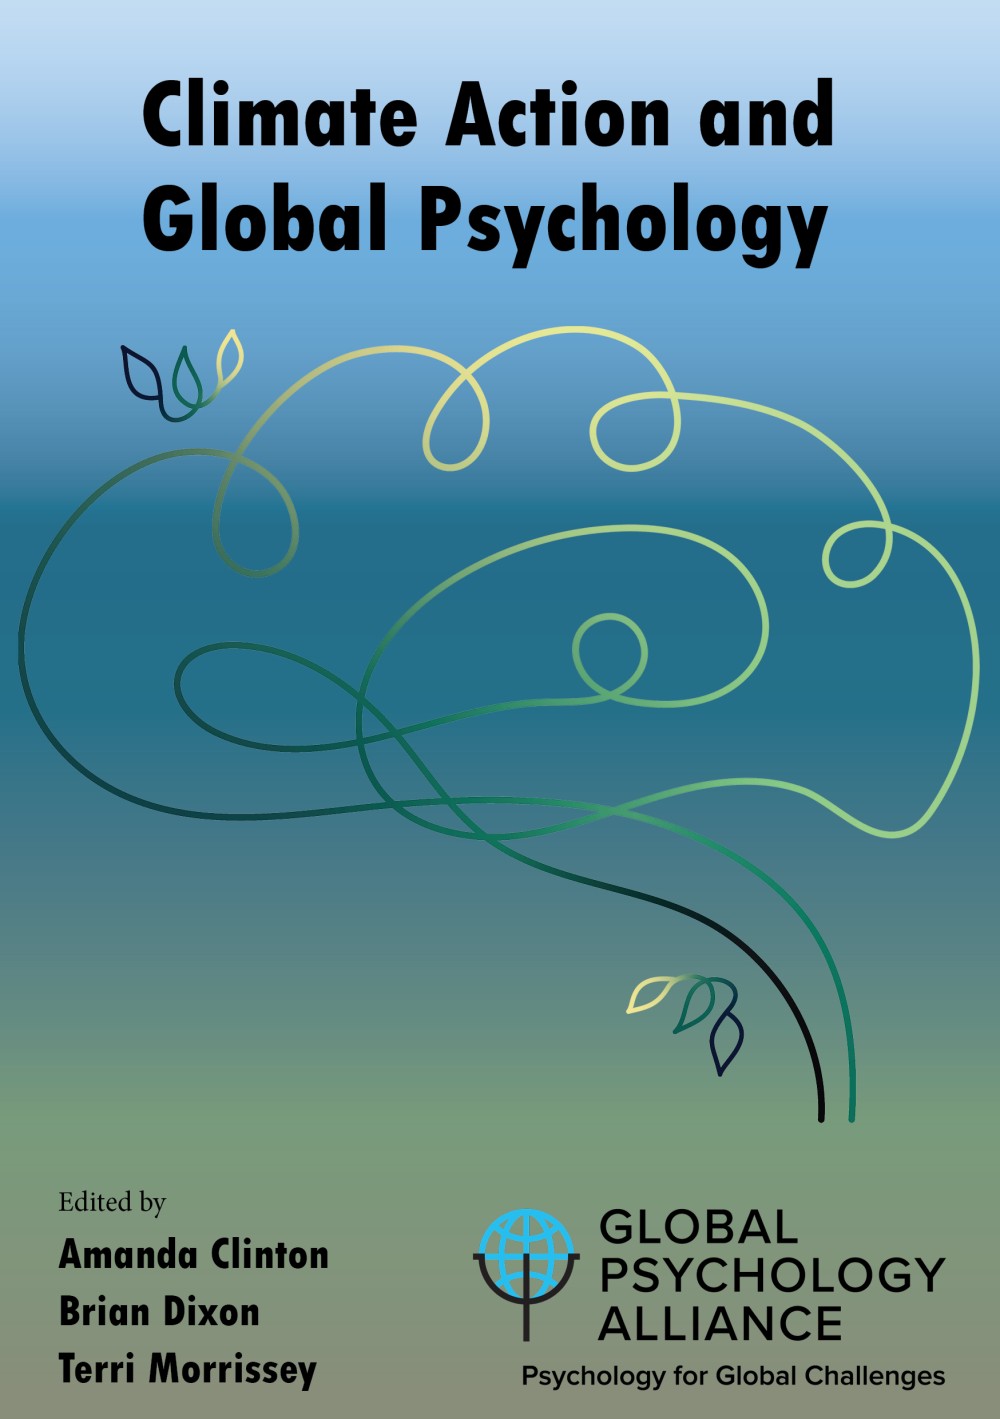 Climate Action and Global Psychology Cover new graphic2 v2